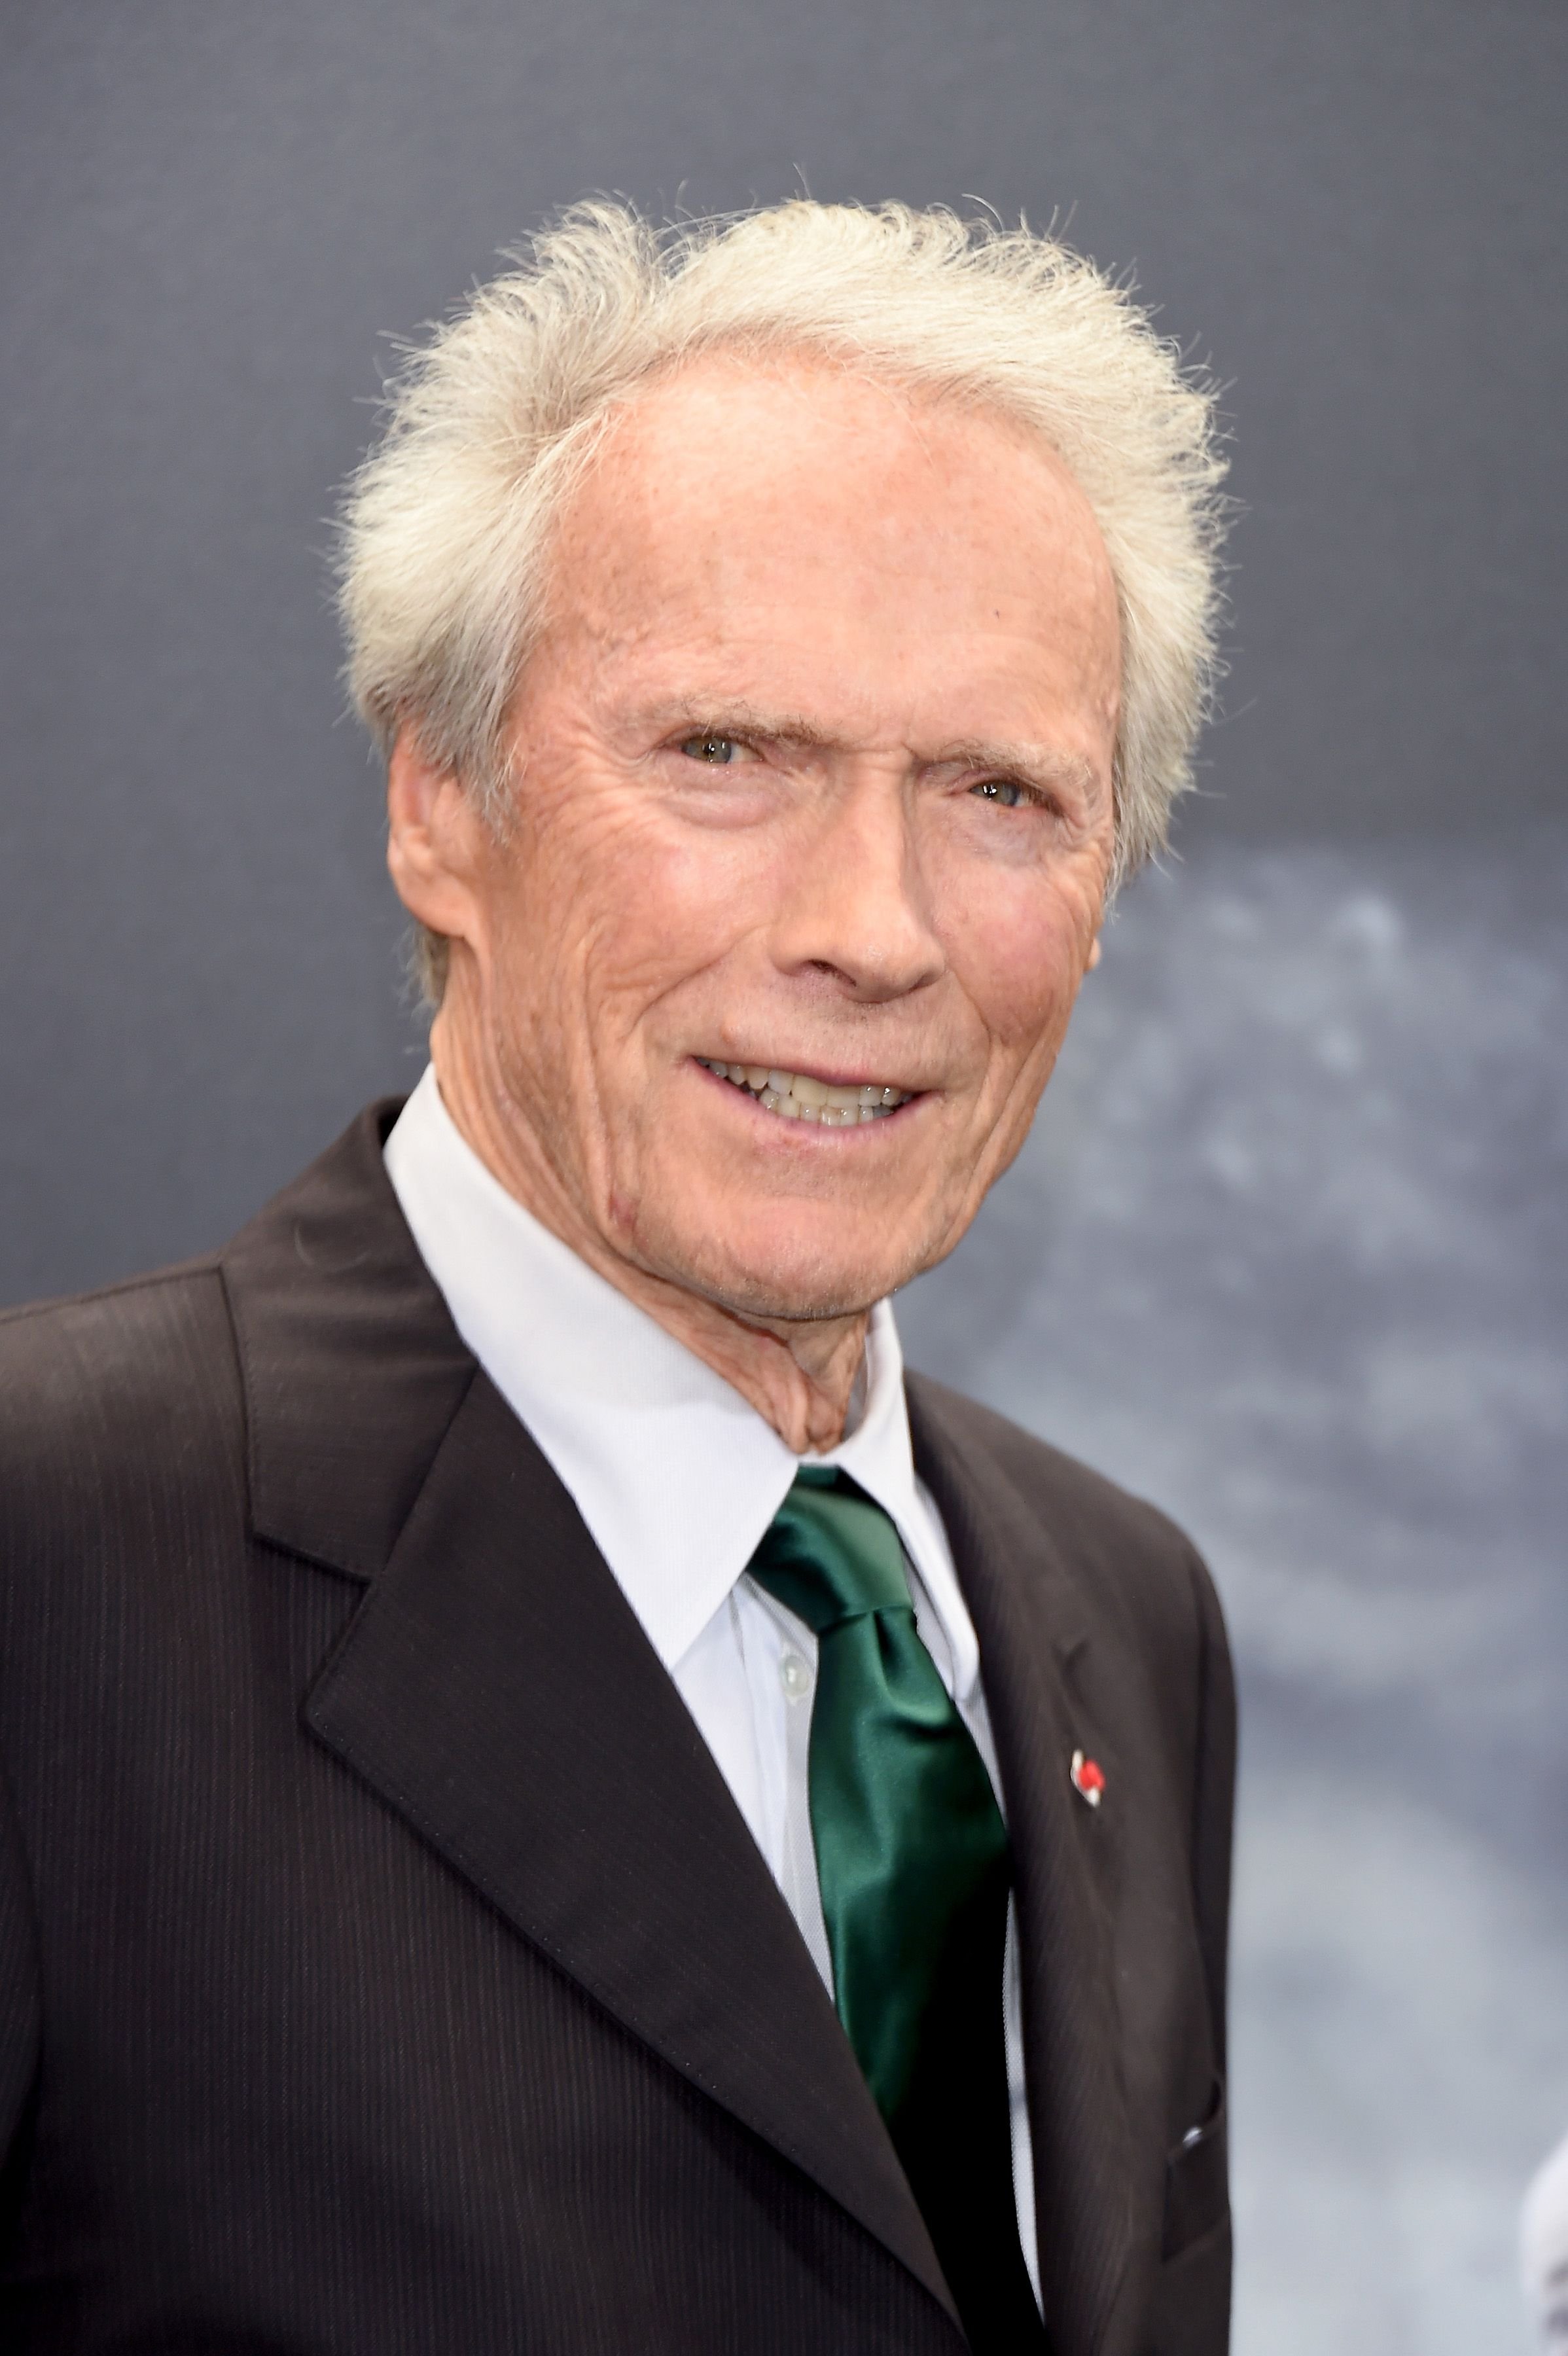 Clint Eastwood at the "Sully" New York Premiere at Alice Tully Hall on September 6, 2016 in New York City | Photo: Getty Images